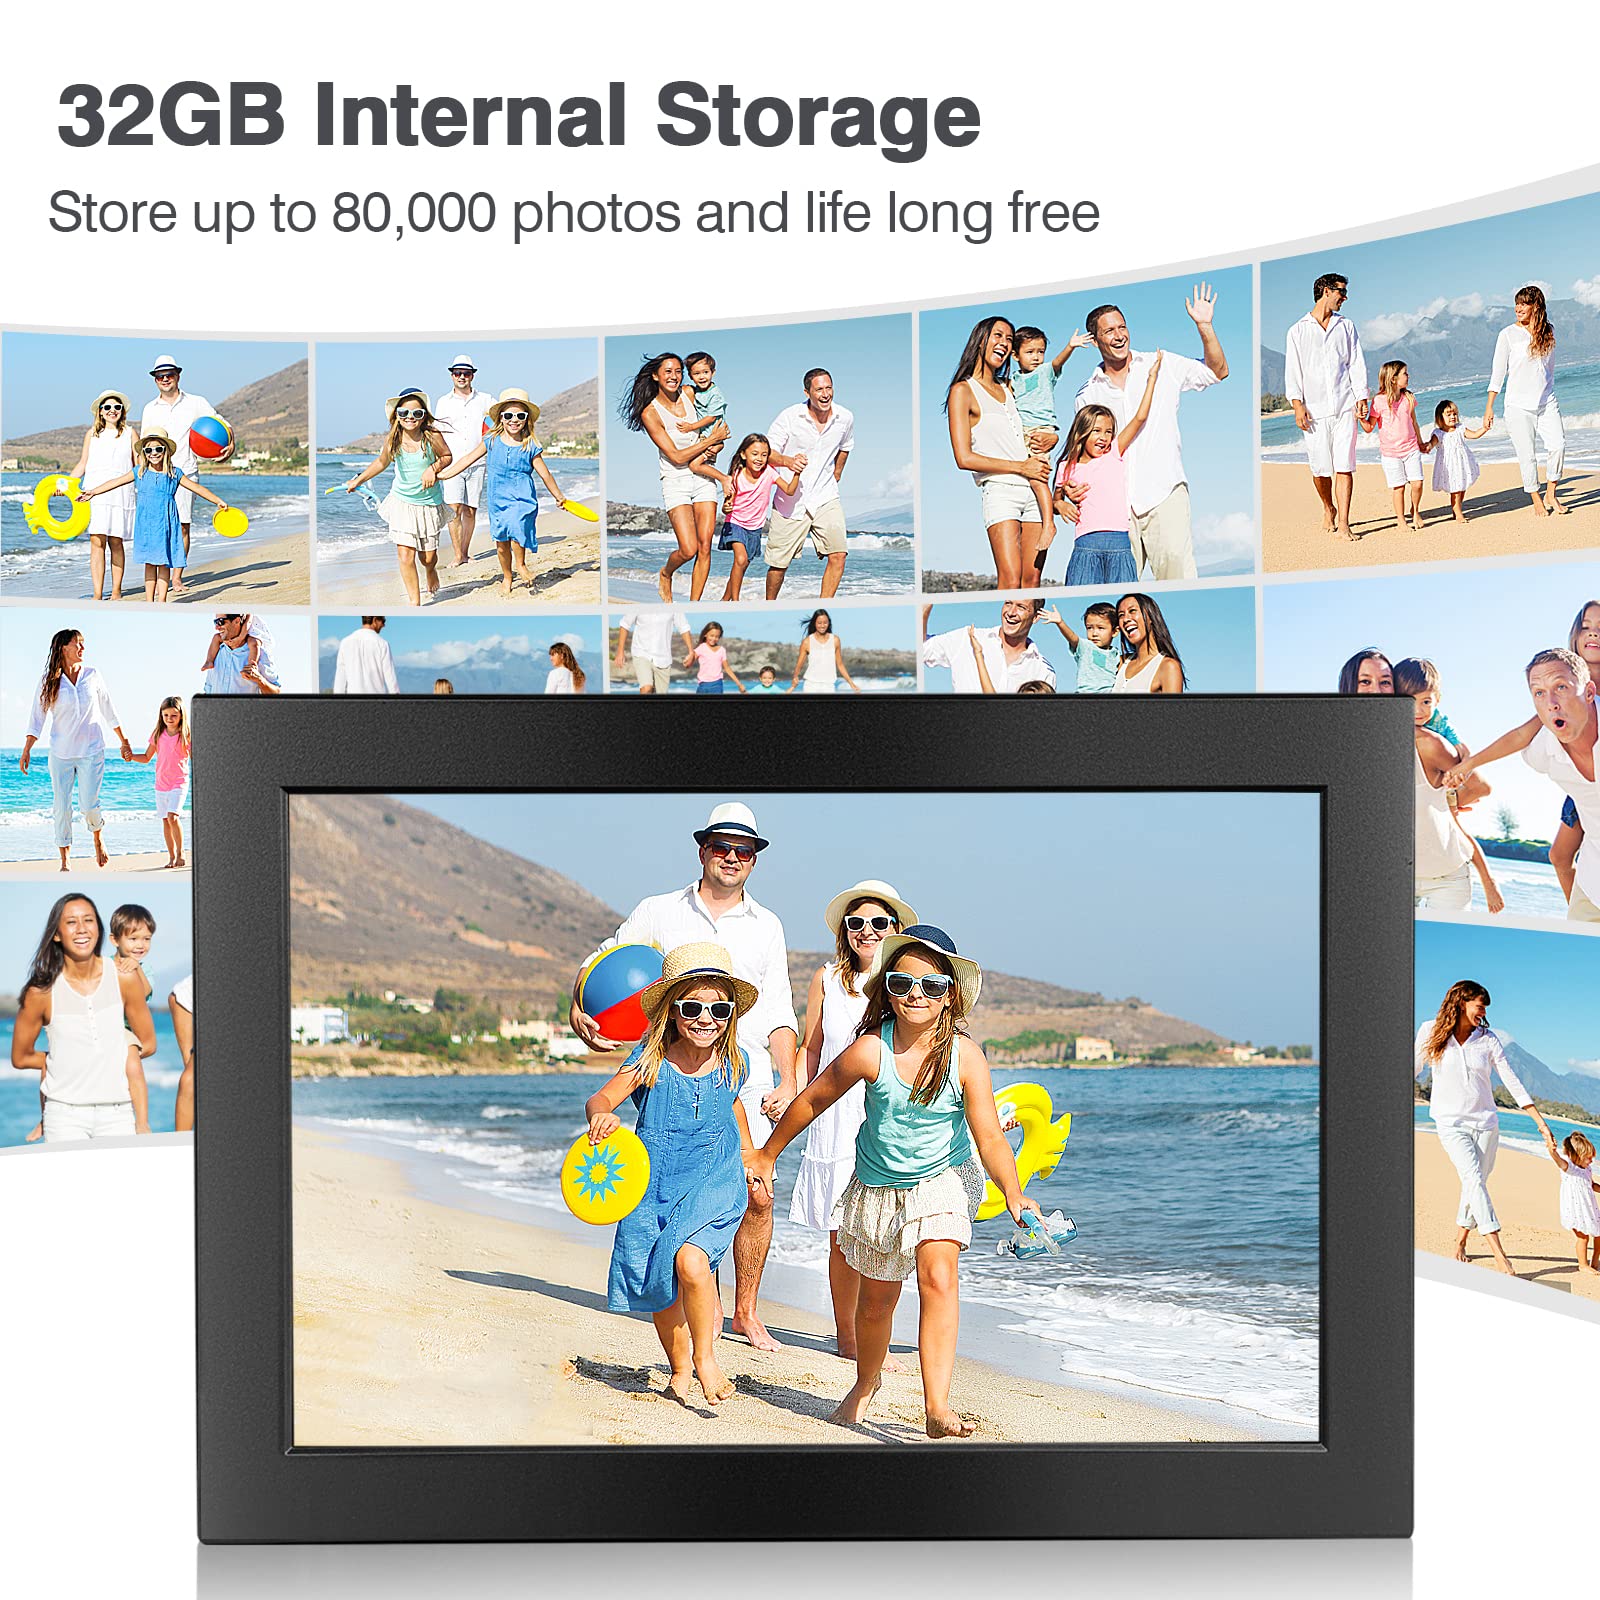 Digital Picture Frame 10.1 inch Wi-Fi Digital Photo Frame, Smart Wi-Fi Photo Frame Electronic with 32GB Storage IPS Display, Easy Setup to Share Photos or Videos by Frameo App Anywhere Anytime